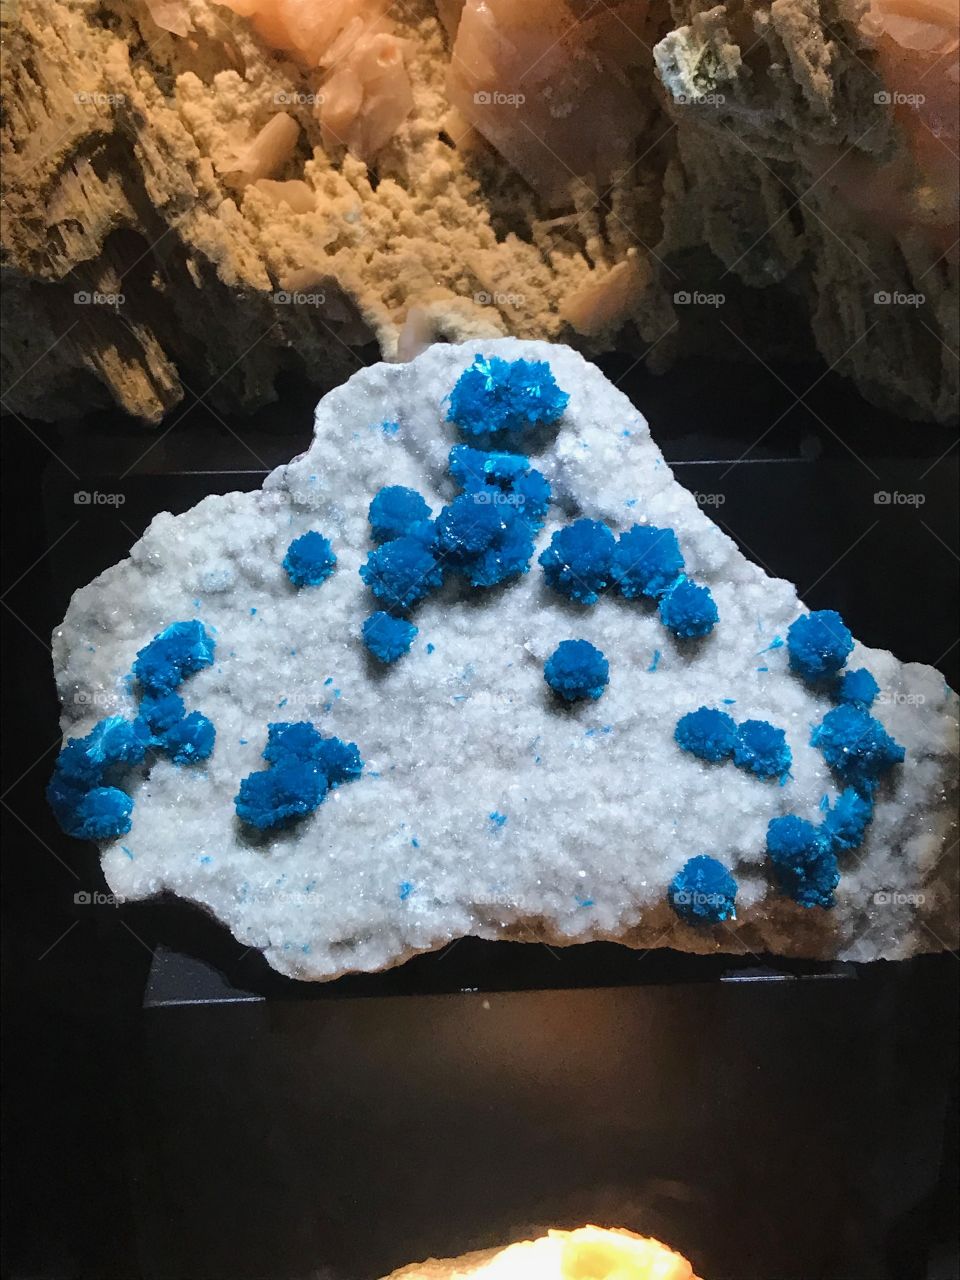 Blue crystal clusters on white crystalline structure 